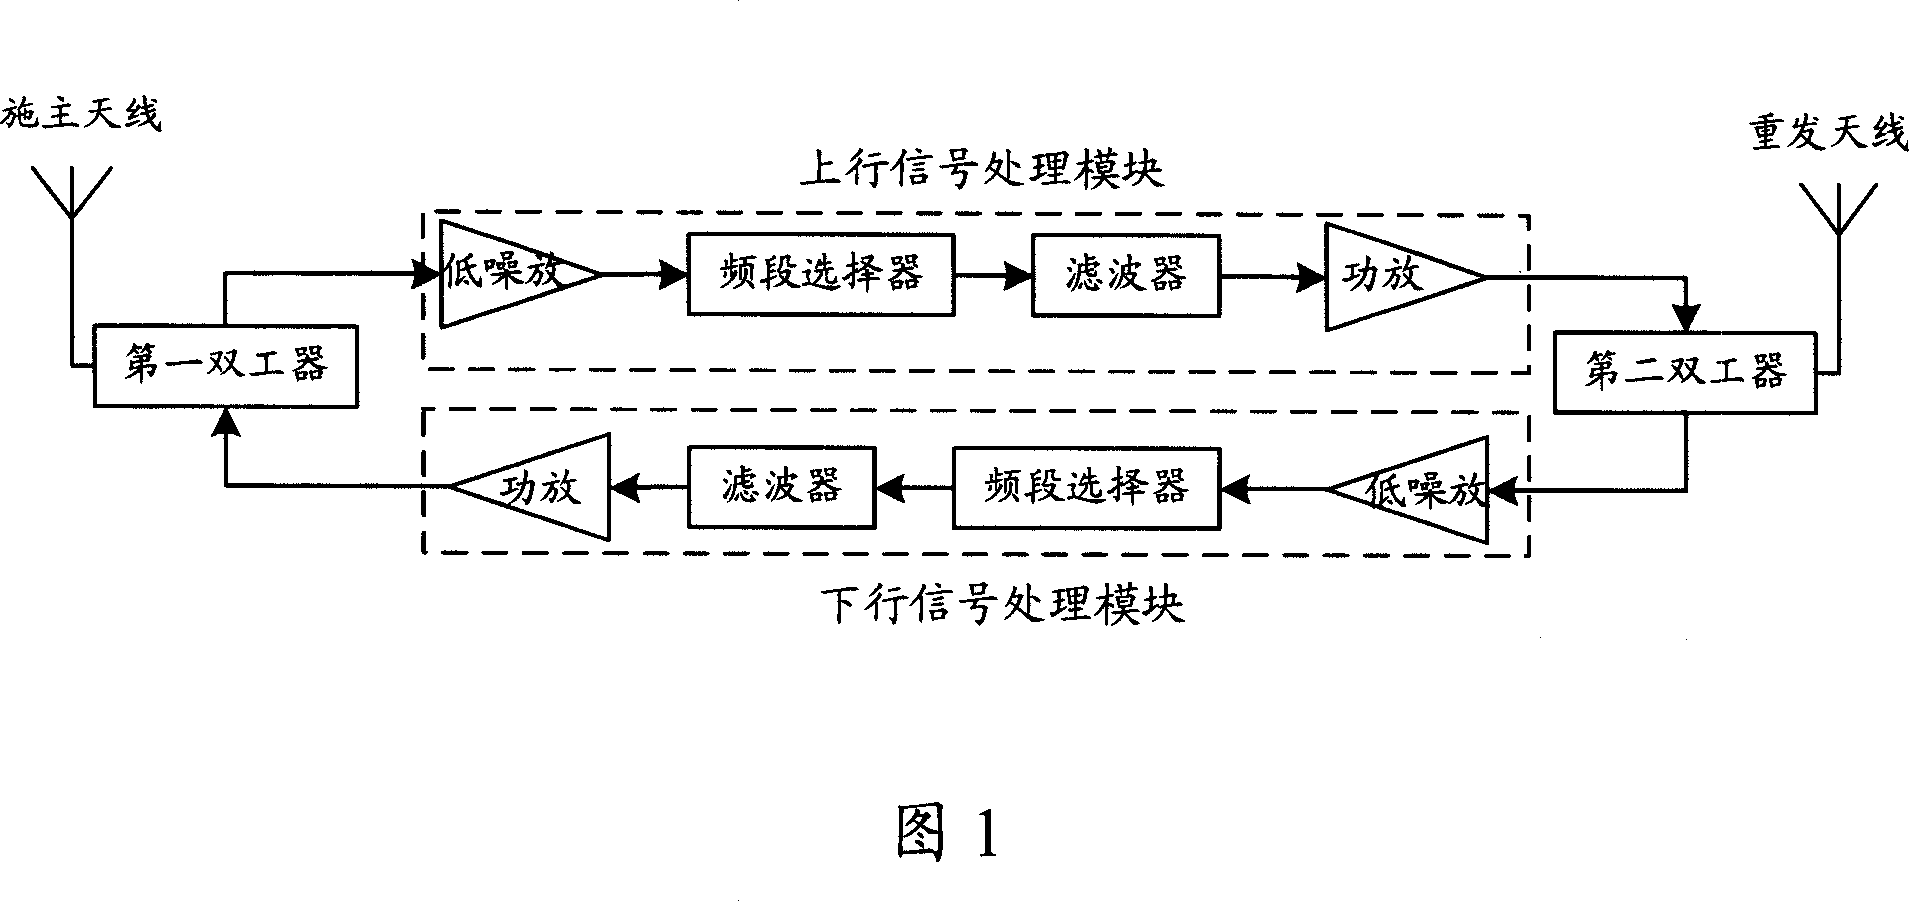 Wireless signal relay processing method and device